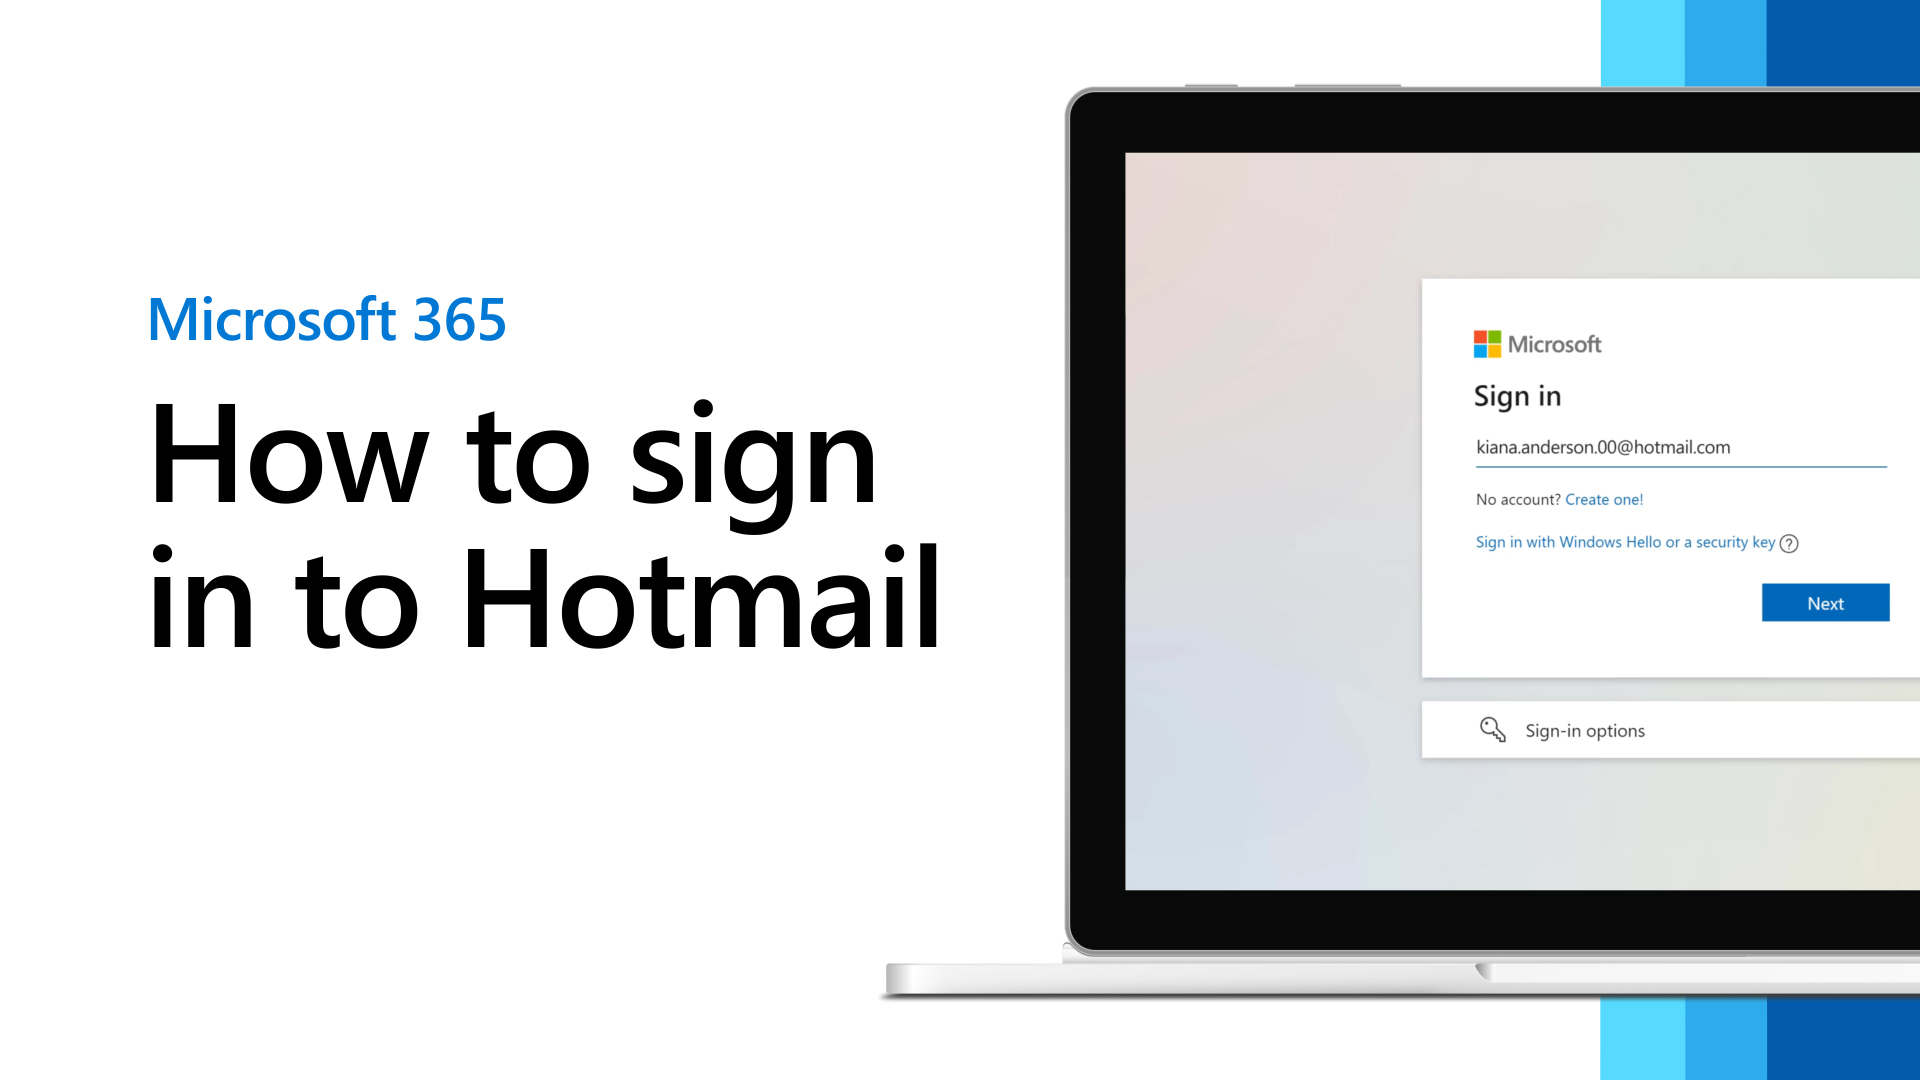 hotmail - hotmail login - hotmail sign in - www.hotmail.com - hotmail.com